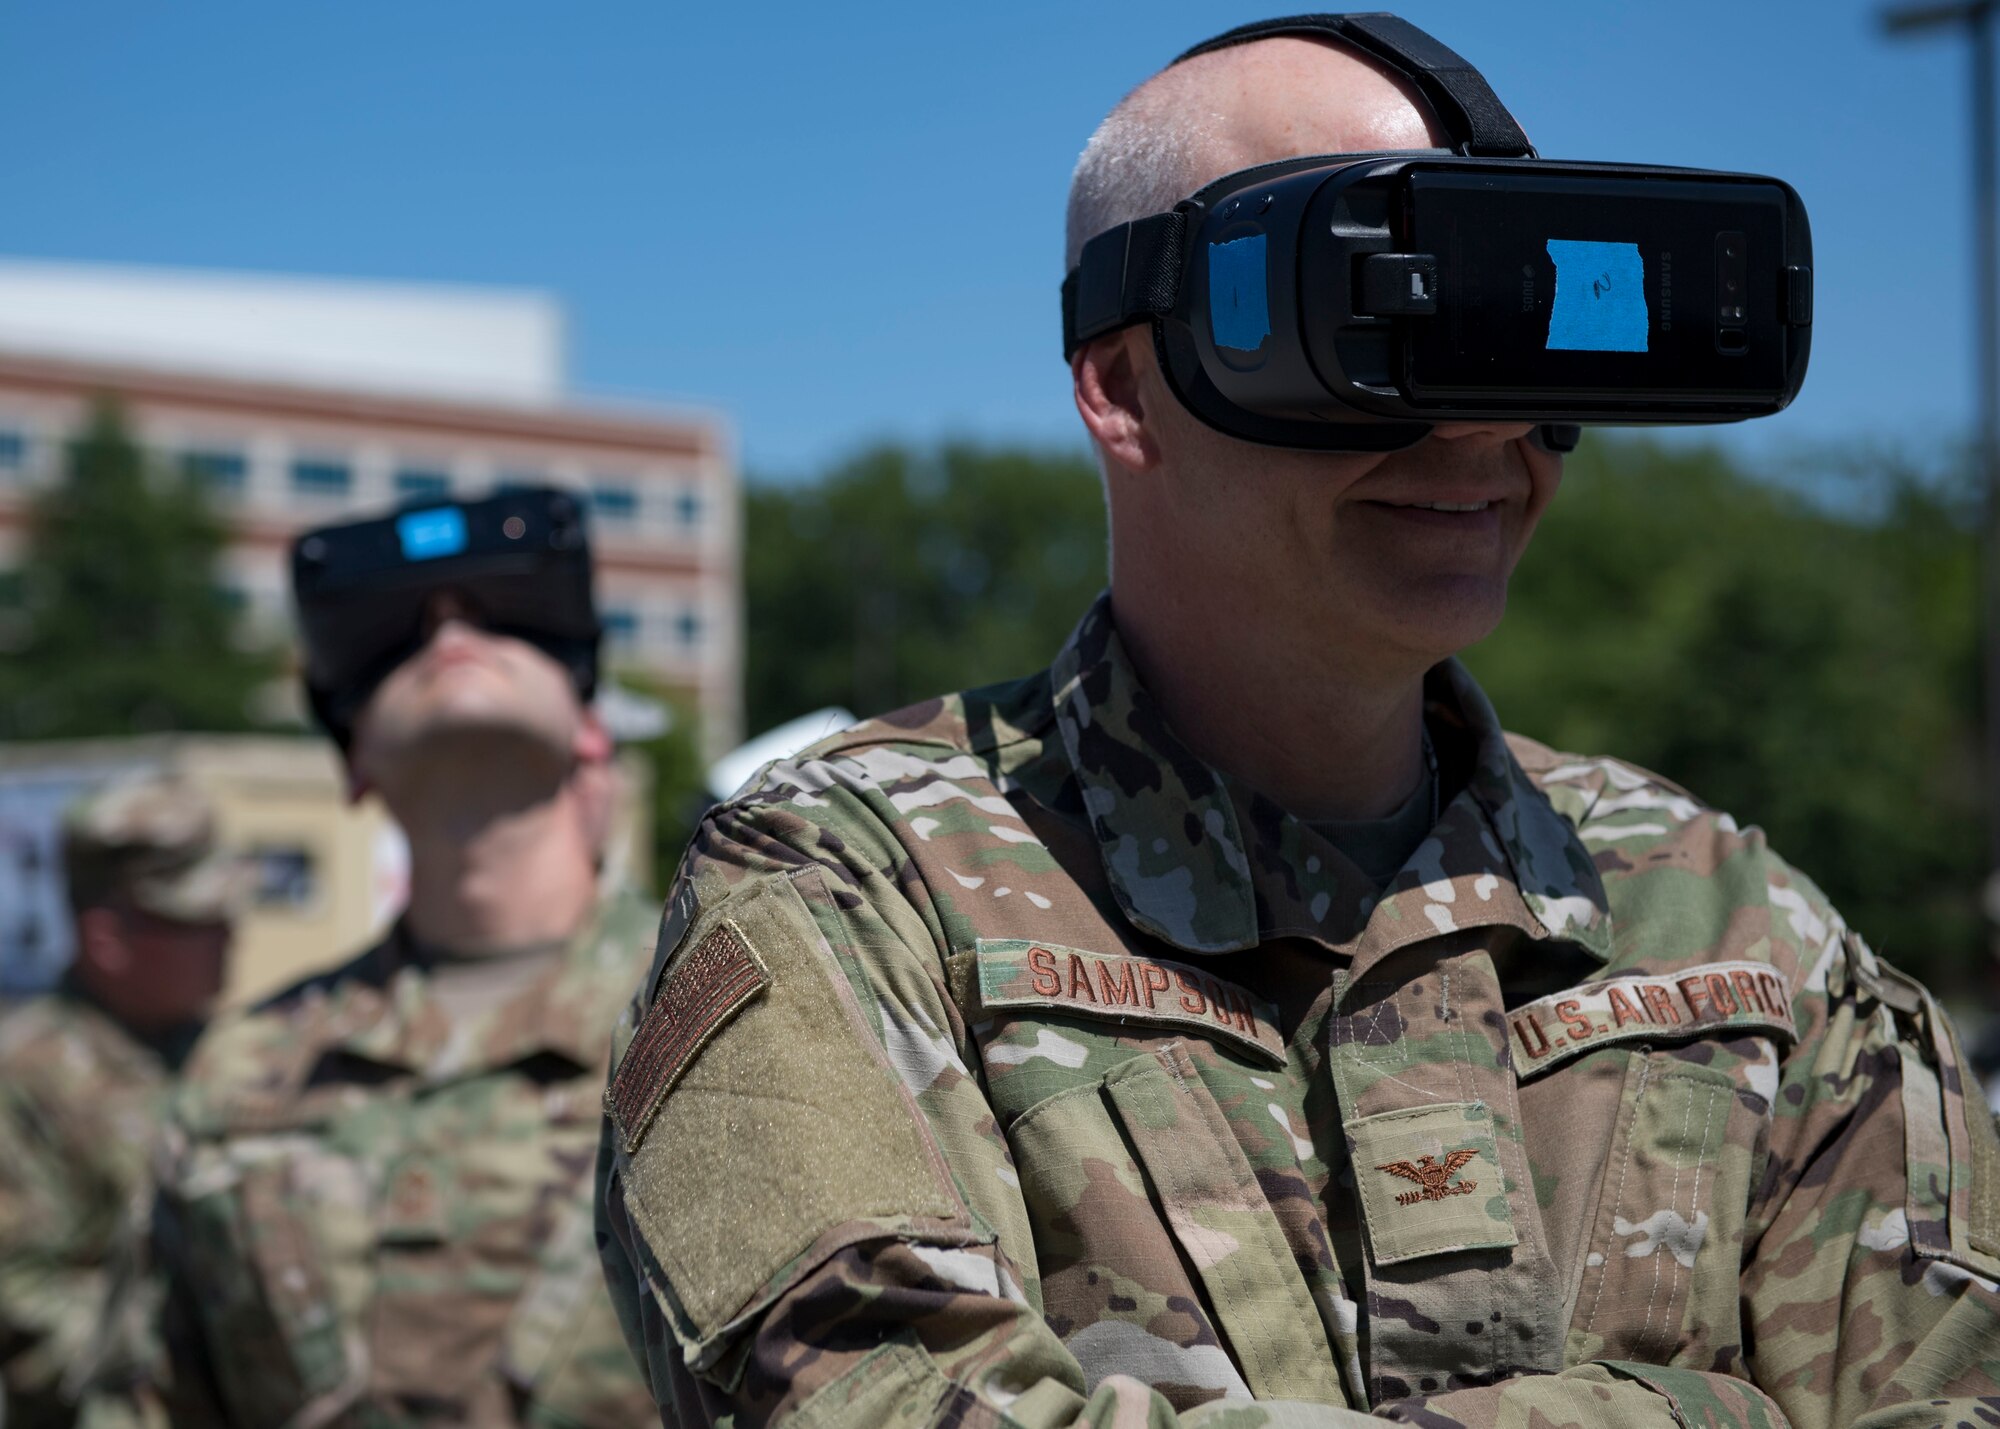 U.S. Air Force Col. James Sampson, Air Force Medical Operations Agency chief medical consultant, views a medical shelter facility with virtual reality goggles during the Manpower and Equipment Force Packaging Summit at Joint Base Langley-Eustis, Virginia, June 4, 2019.